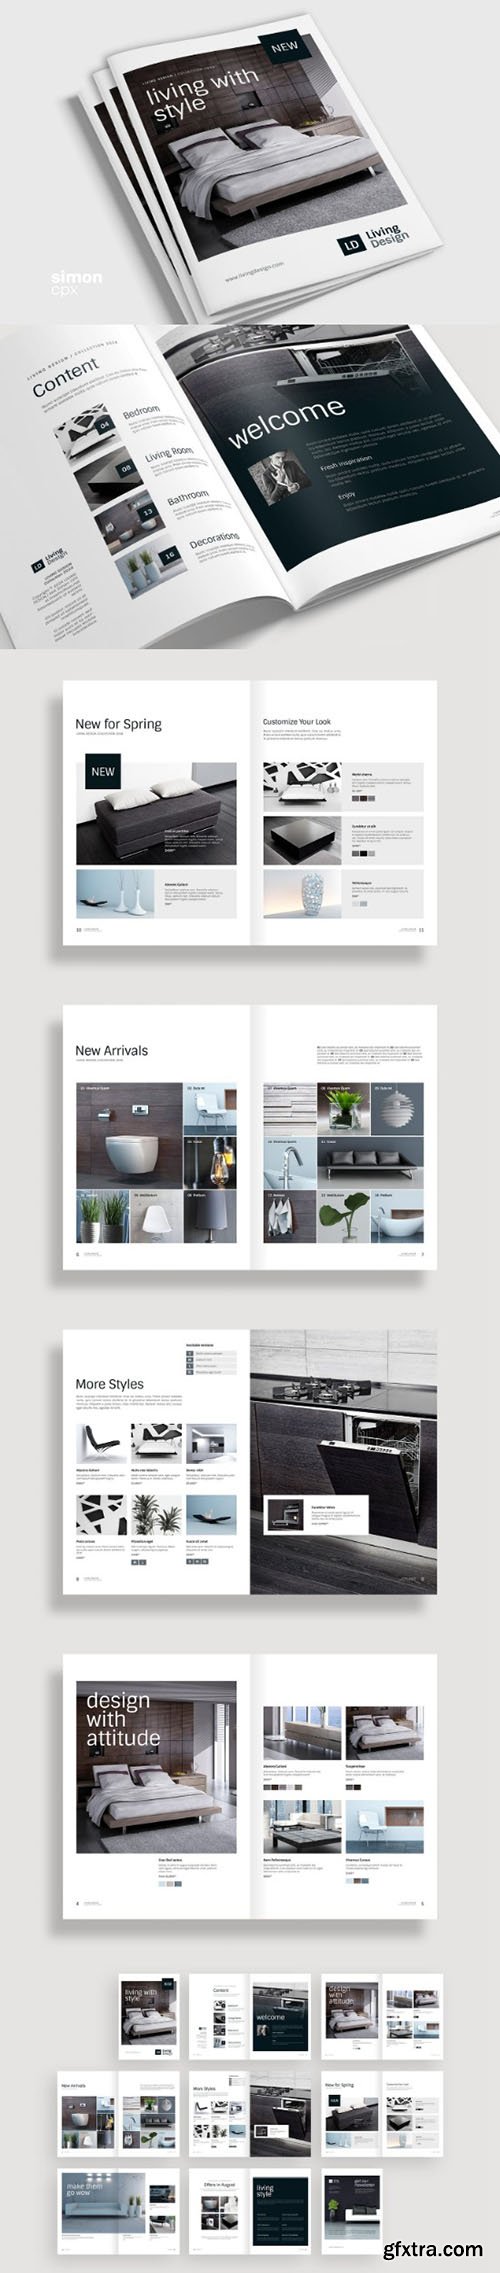 Living Design - Product Catalog Template